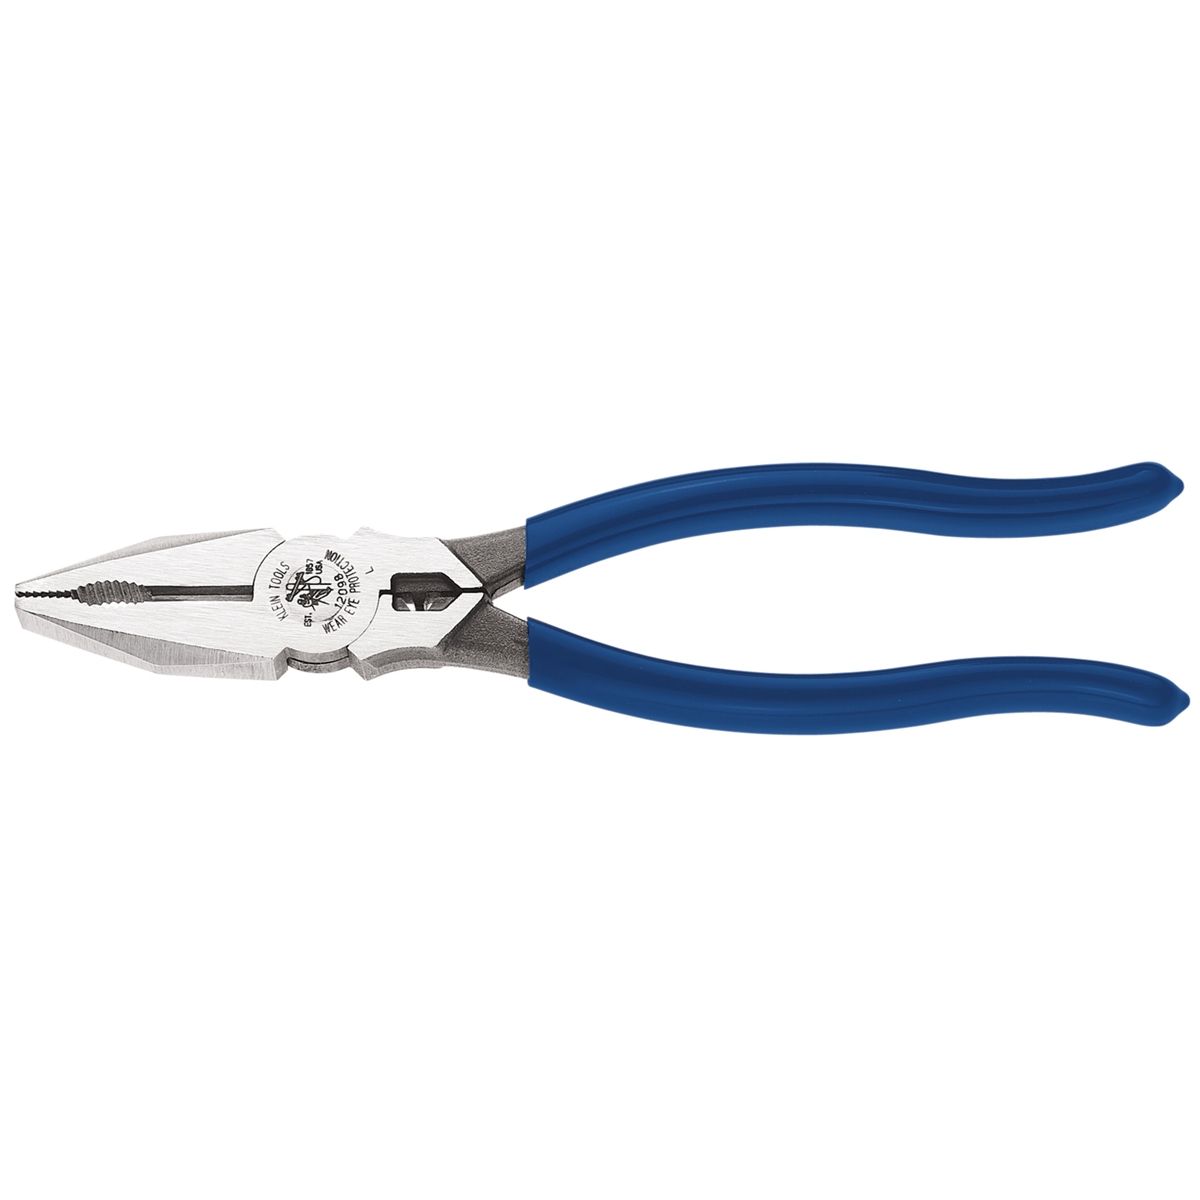 8" Universal Side Cutting Pliers - Connector Crimping